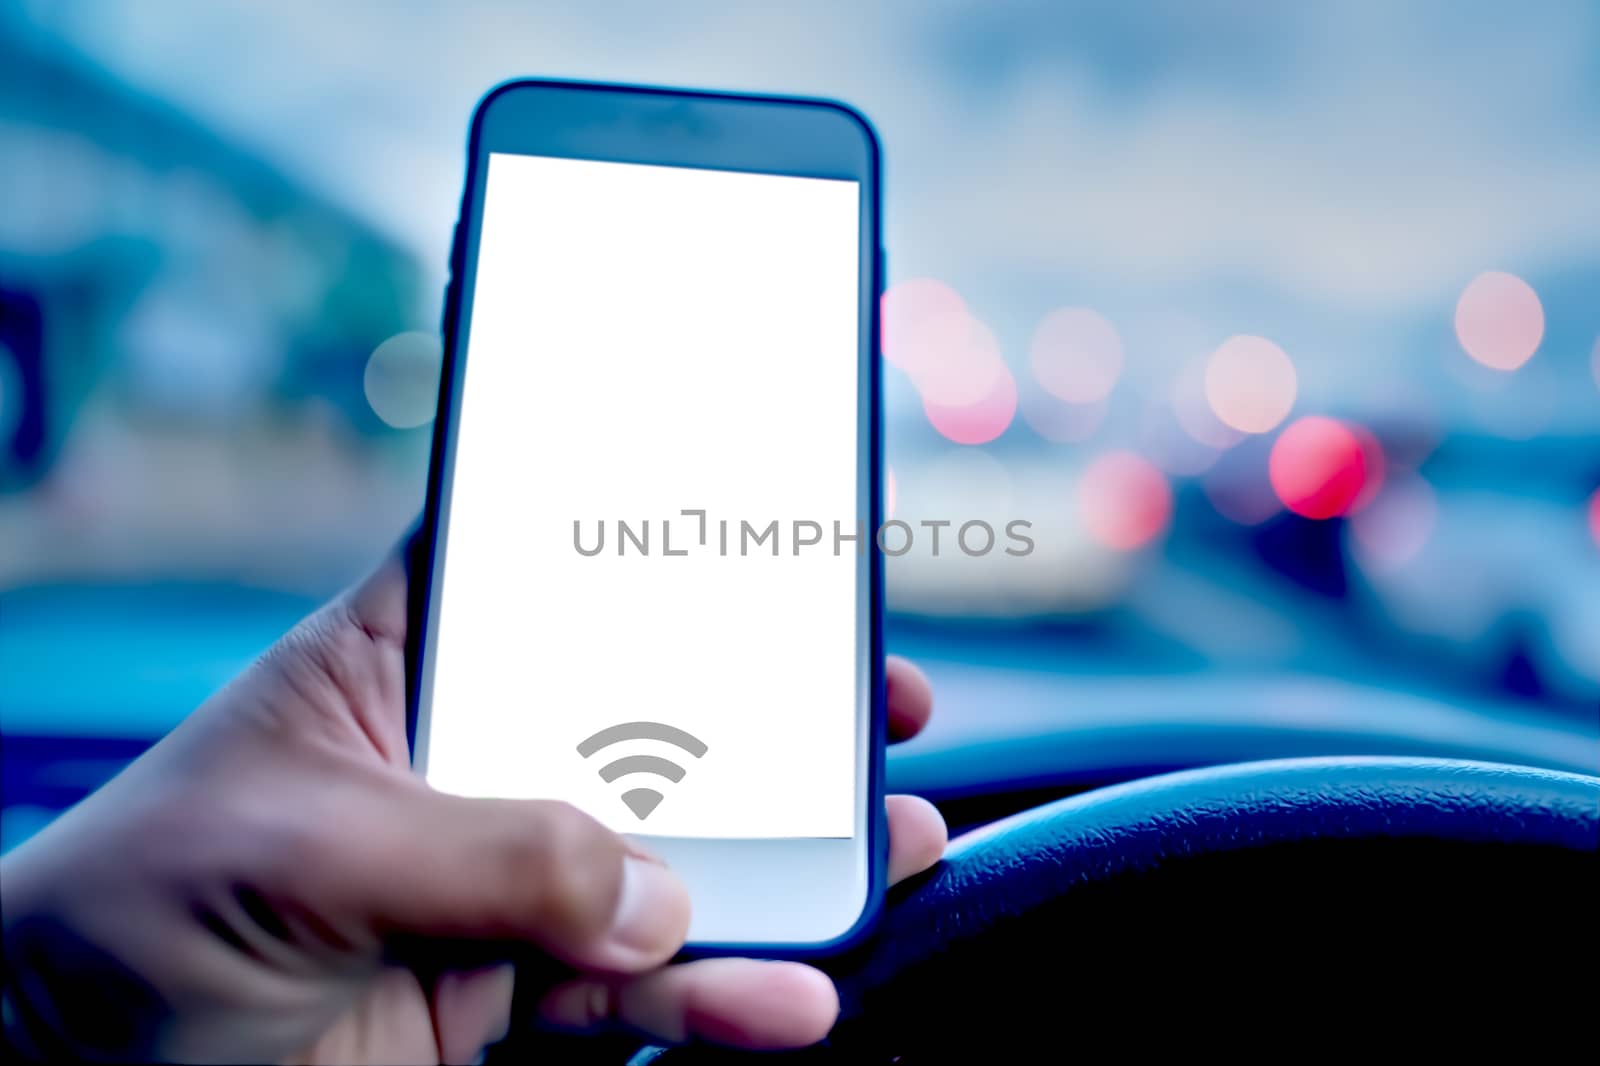 The concept of safety in using smart phone technology for communication while driving.